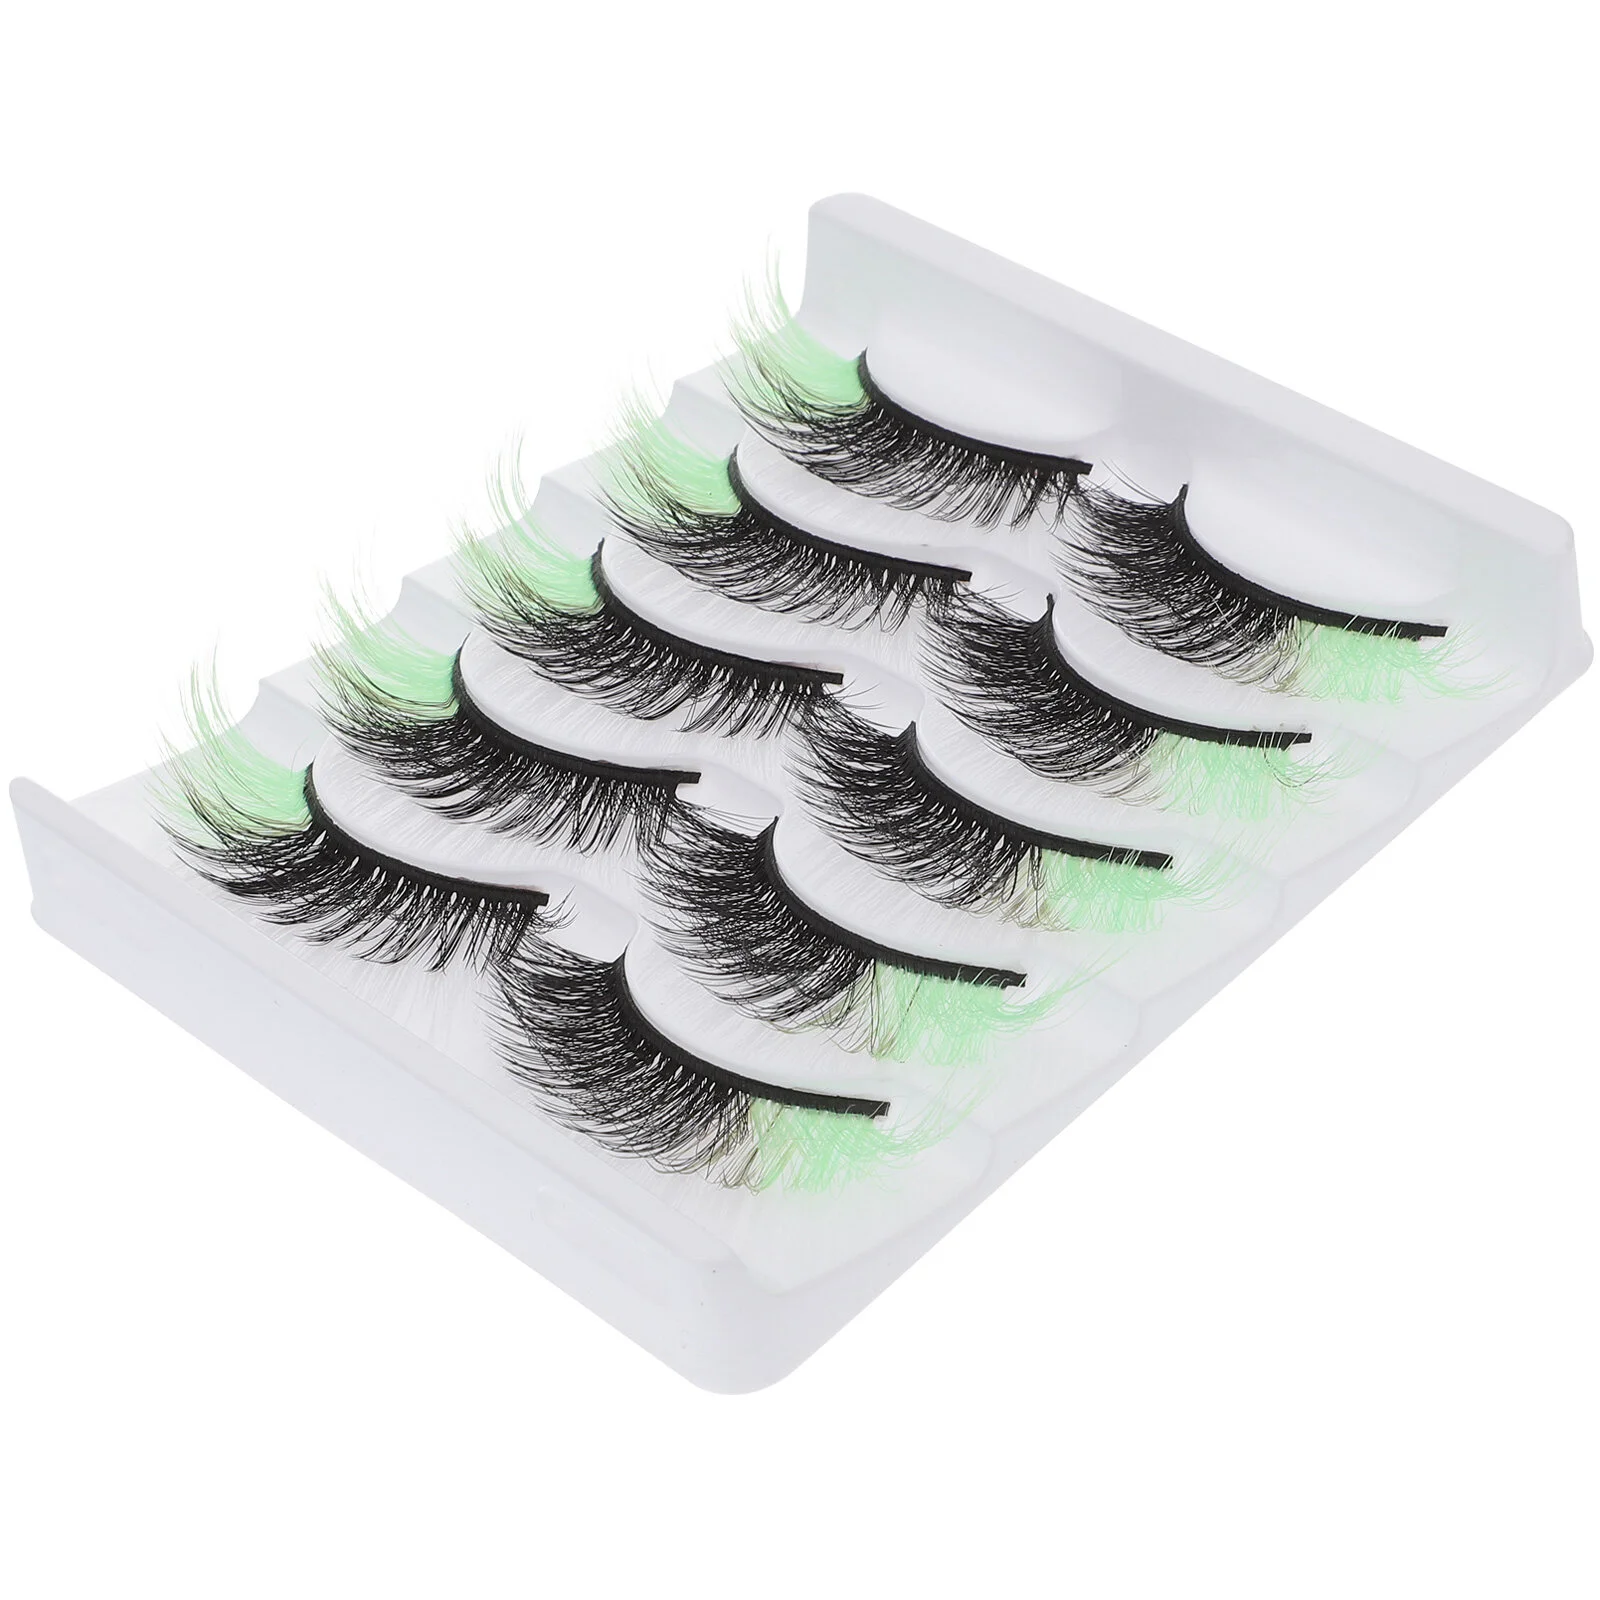 

5 Pairs Colored Lashes, Natural Look Wispy Eyelashes 3D Colored Lashes Strips with Box for ( Light Green )